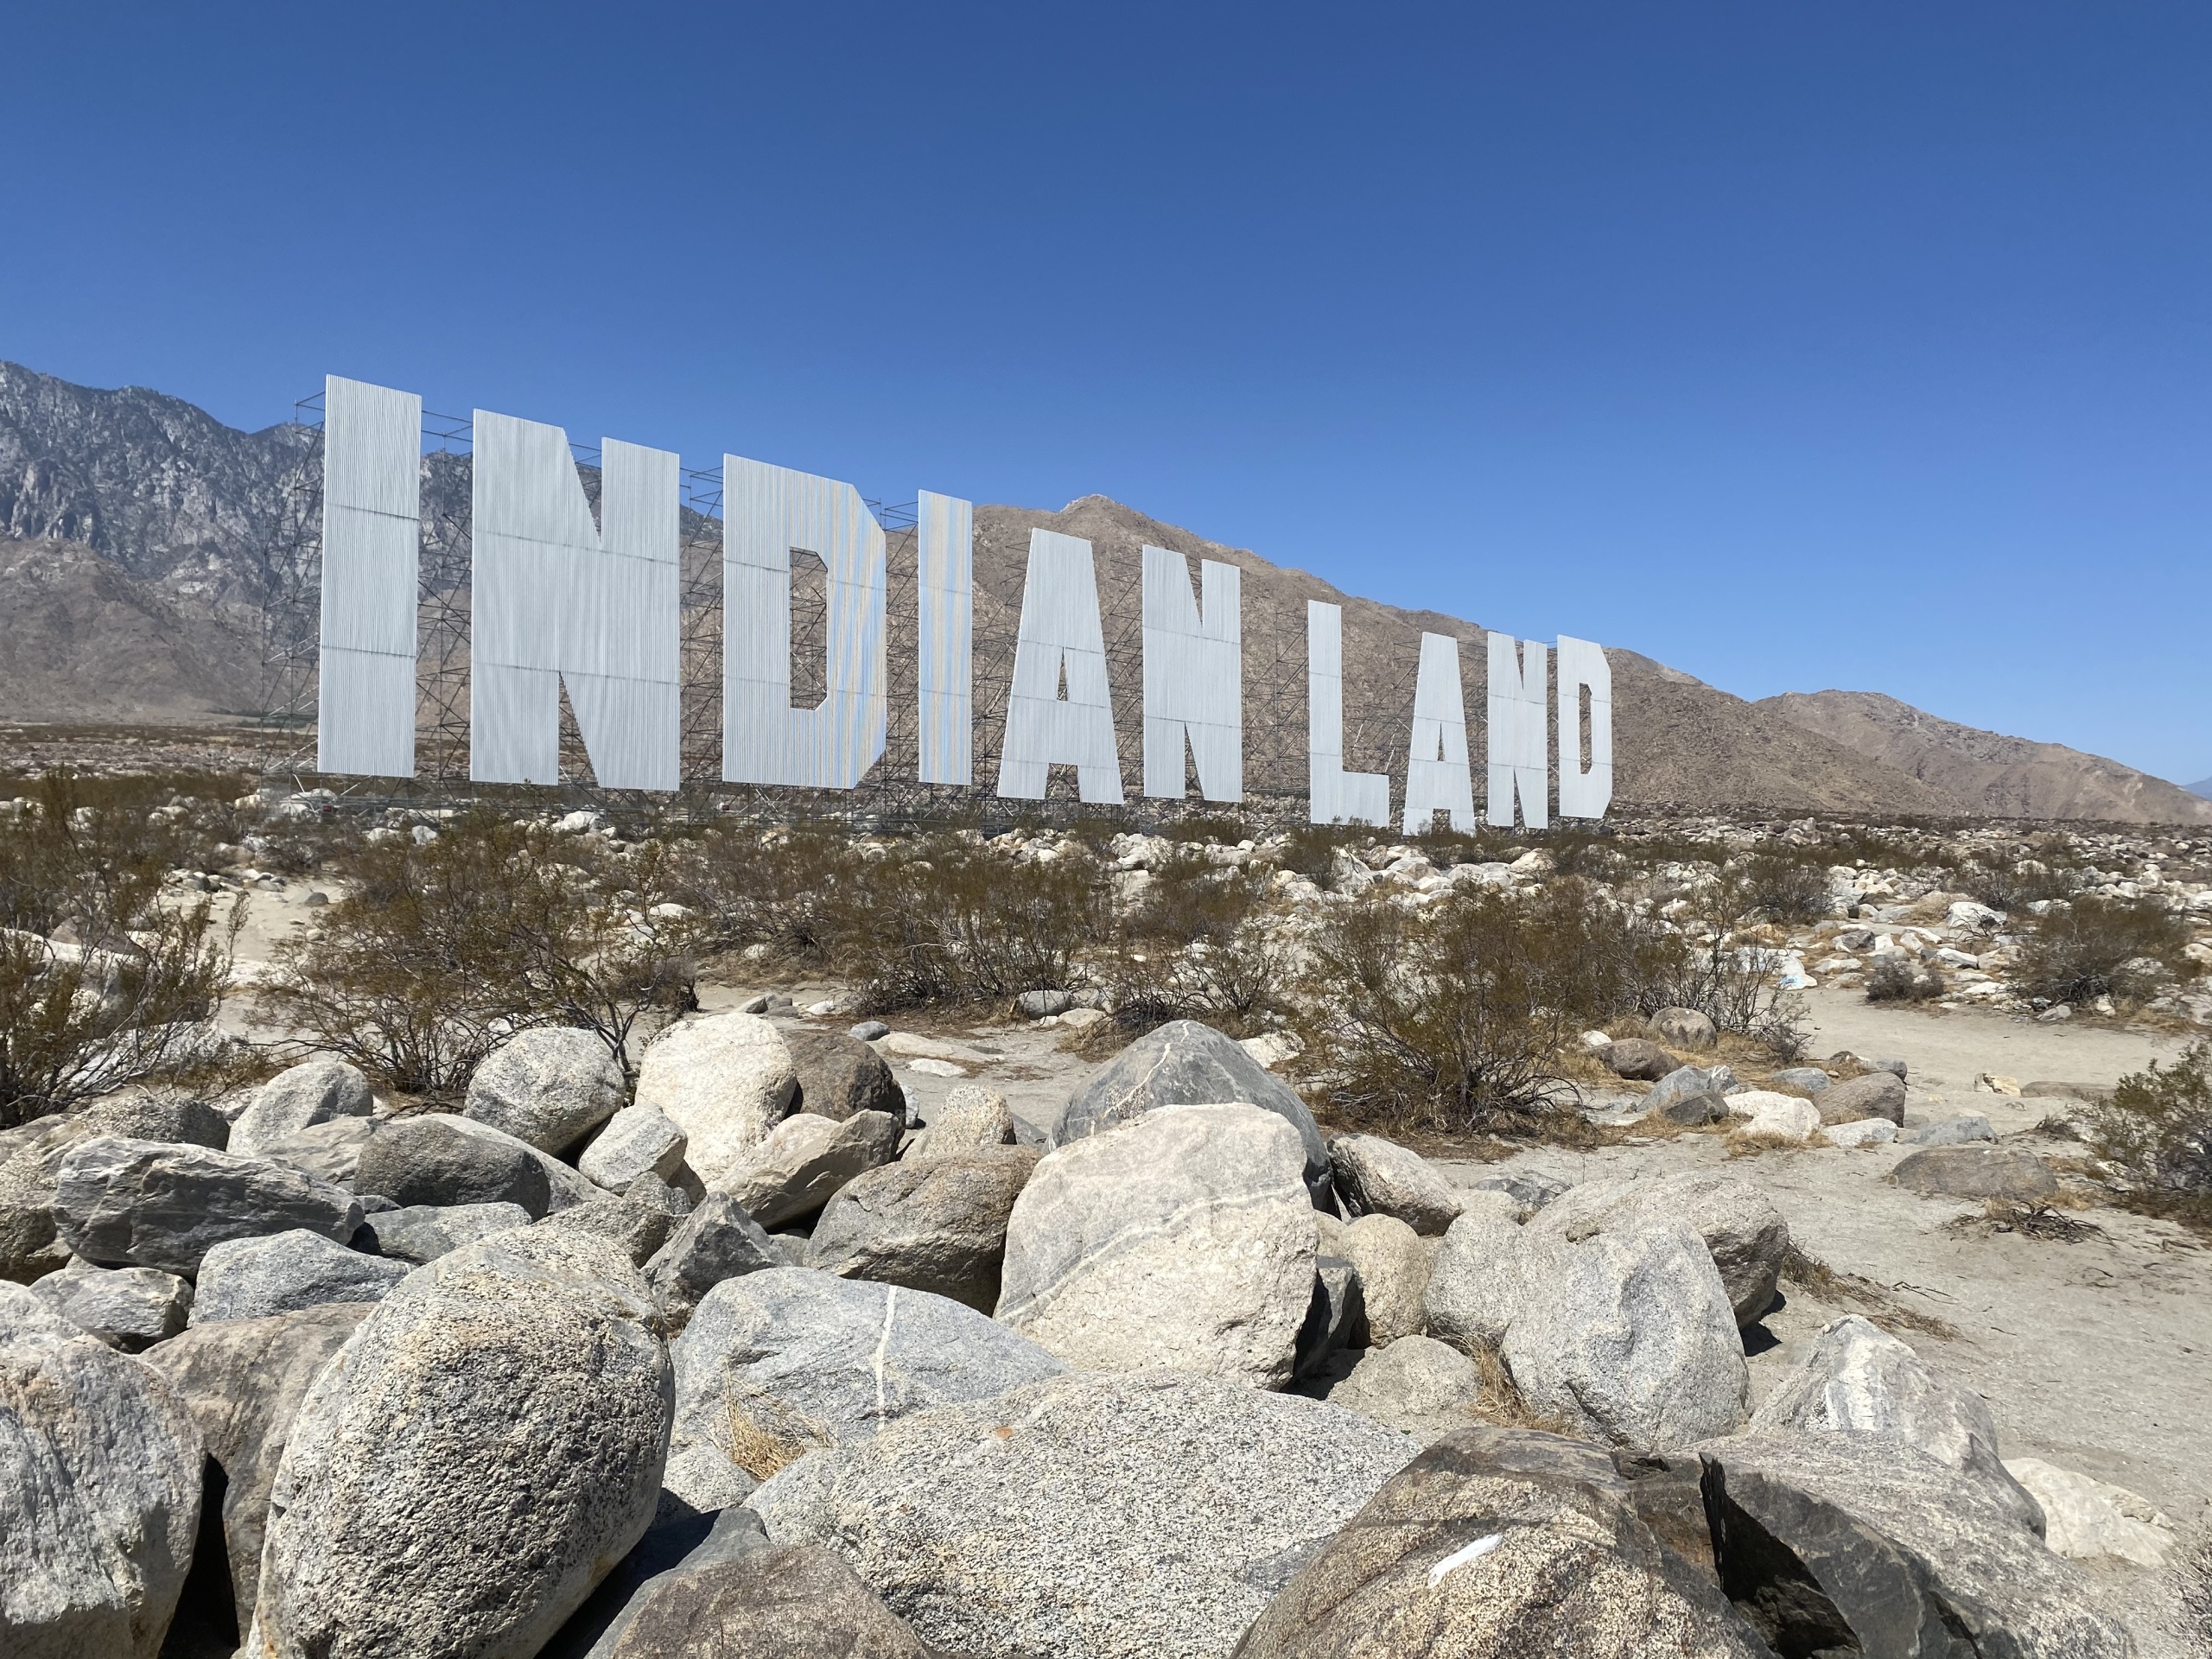 A large-scale installation resembling the Hollywood sign but spelling out “INDIANLAND,” by artist Nicholas Galanin, installed among boulders with desert mountains in the background.